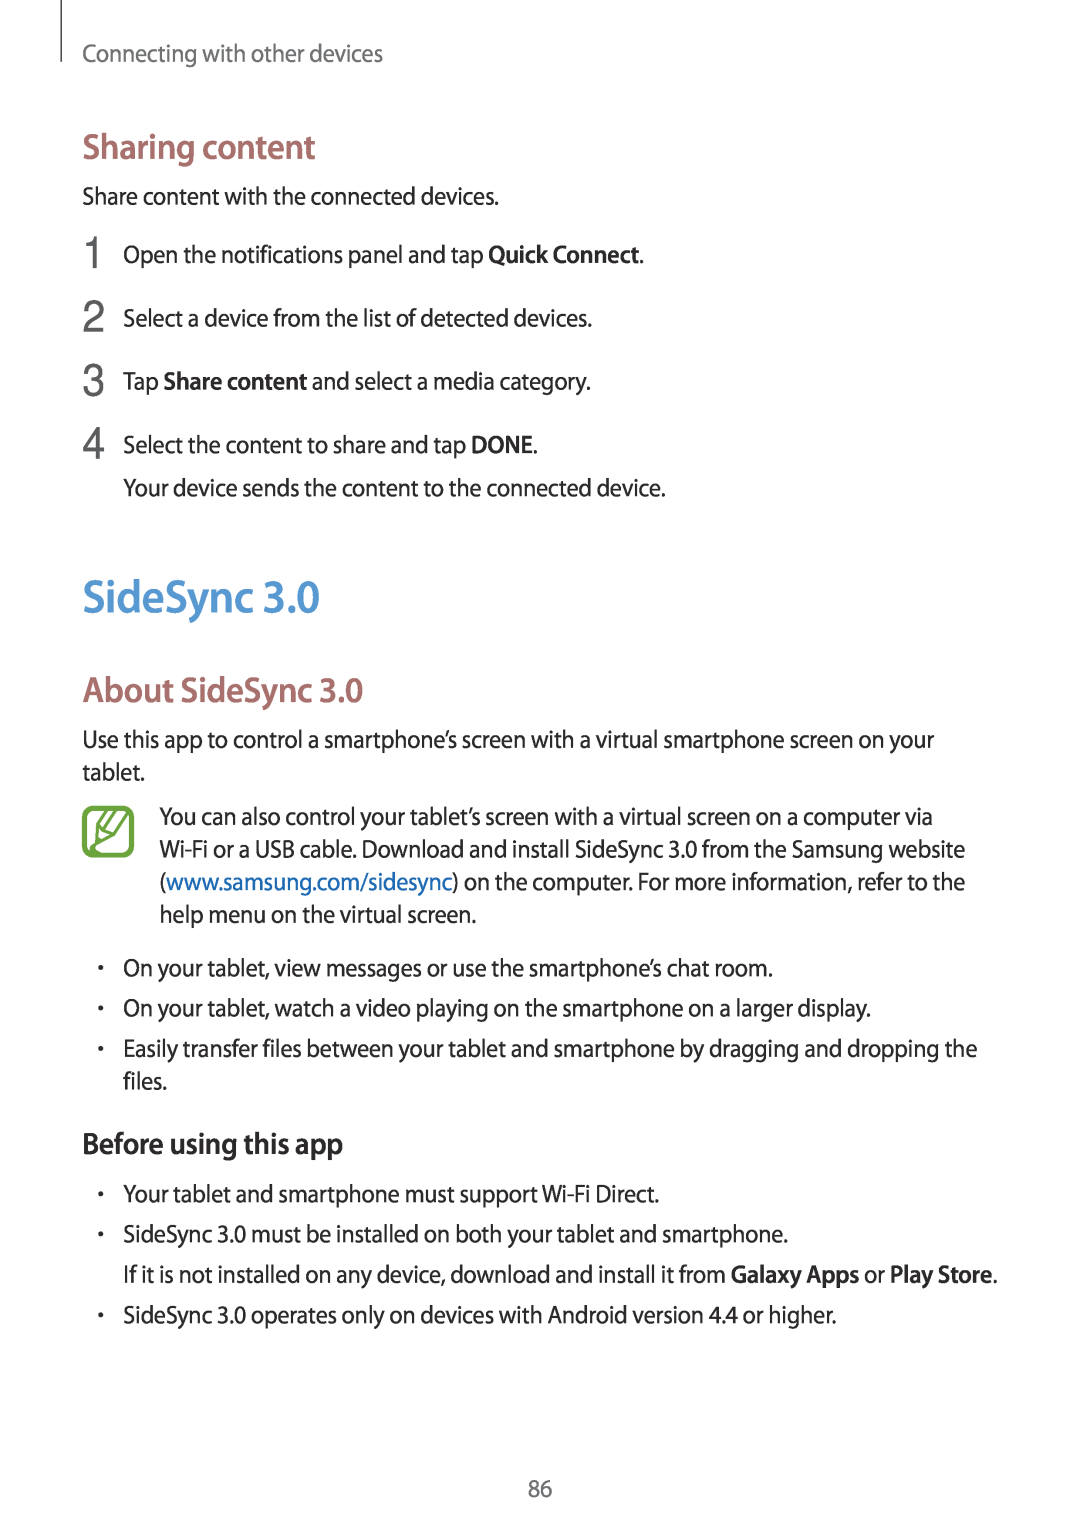 Samsung SM-P550NZKALUX manual Sharing content, About SideSync, Before using this app, Connecting with other devices 